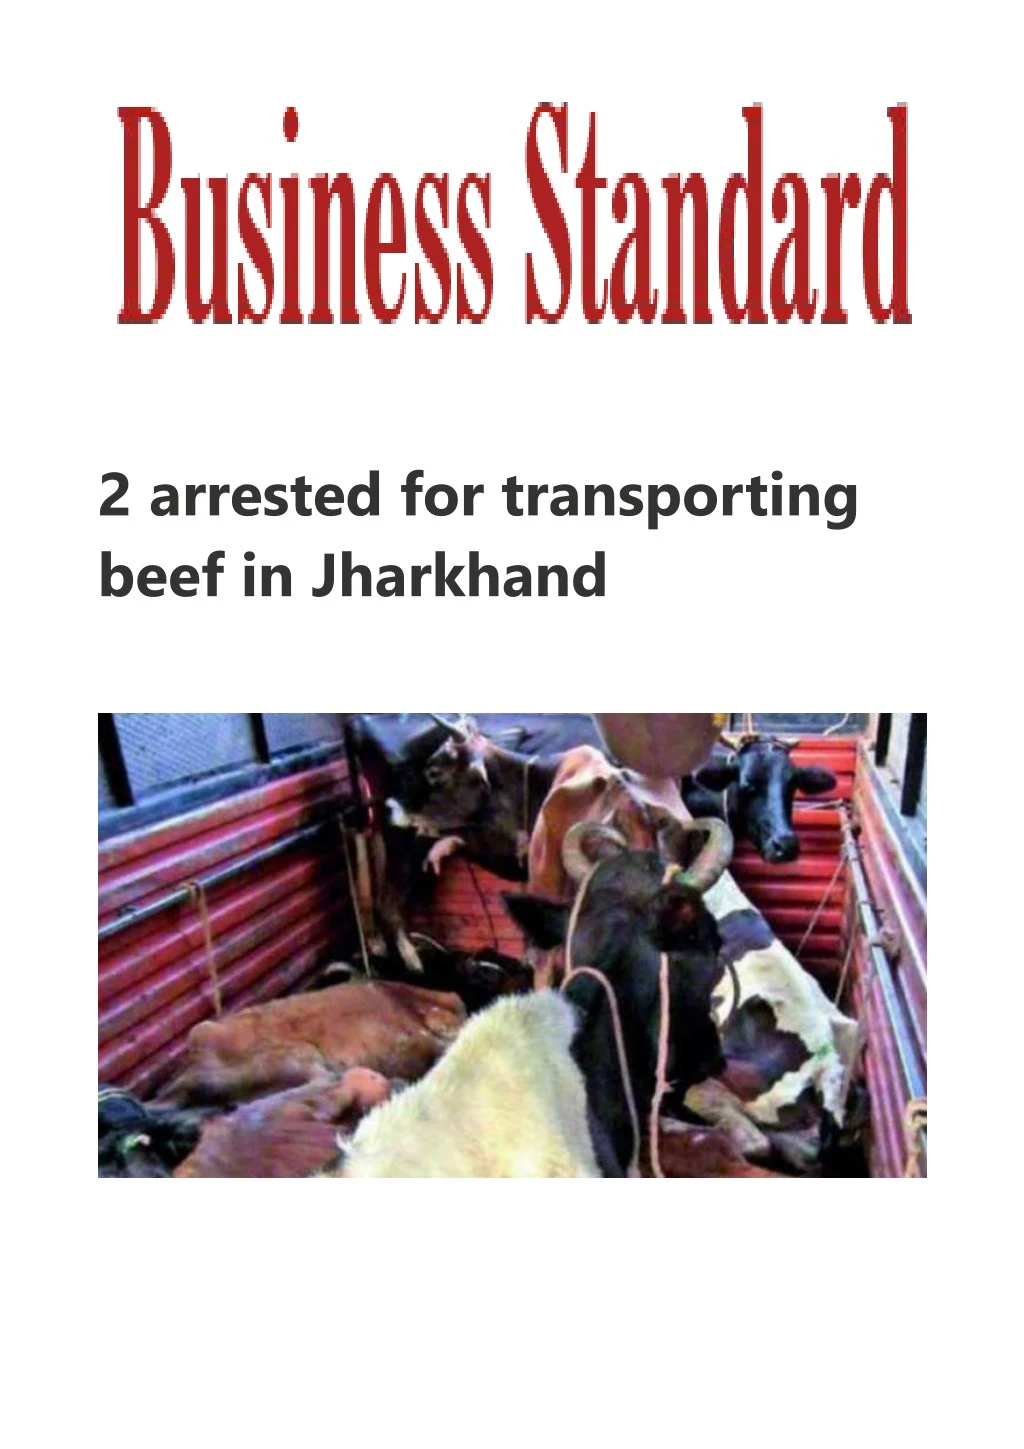 2 arrested for transporting beef in jharkhand